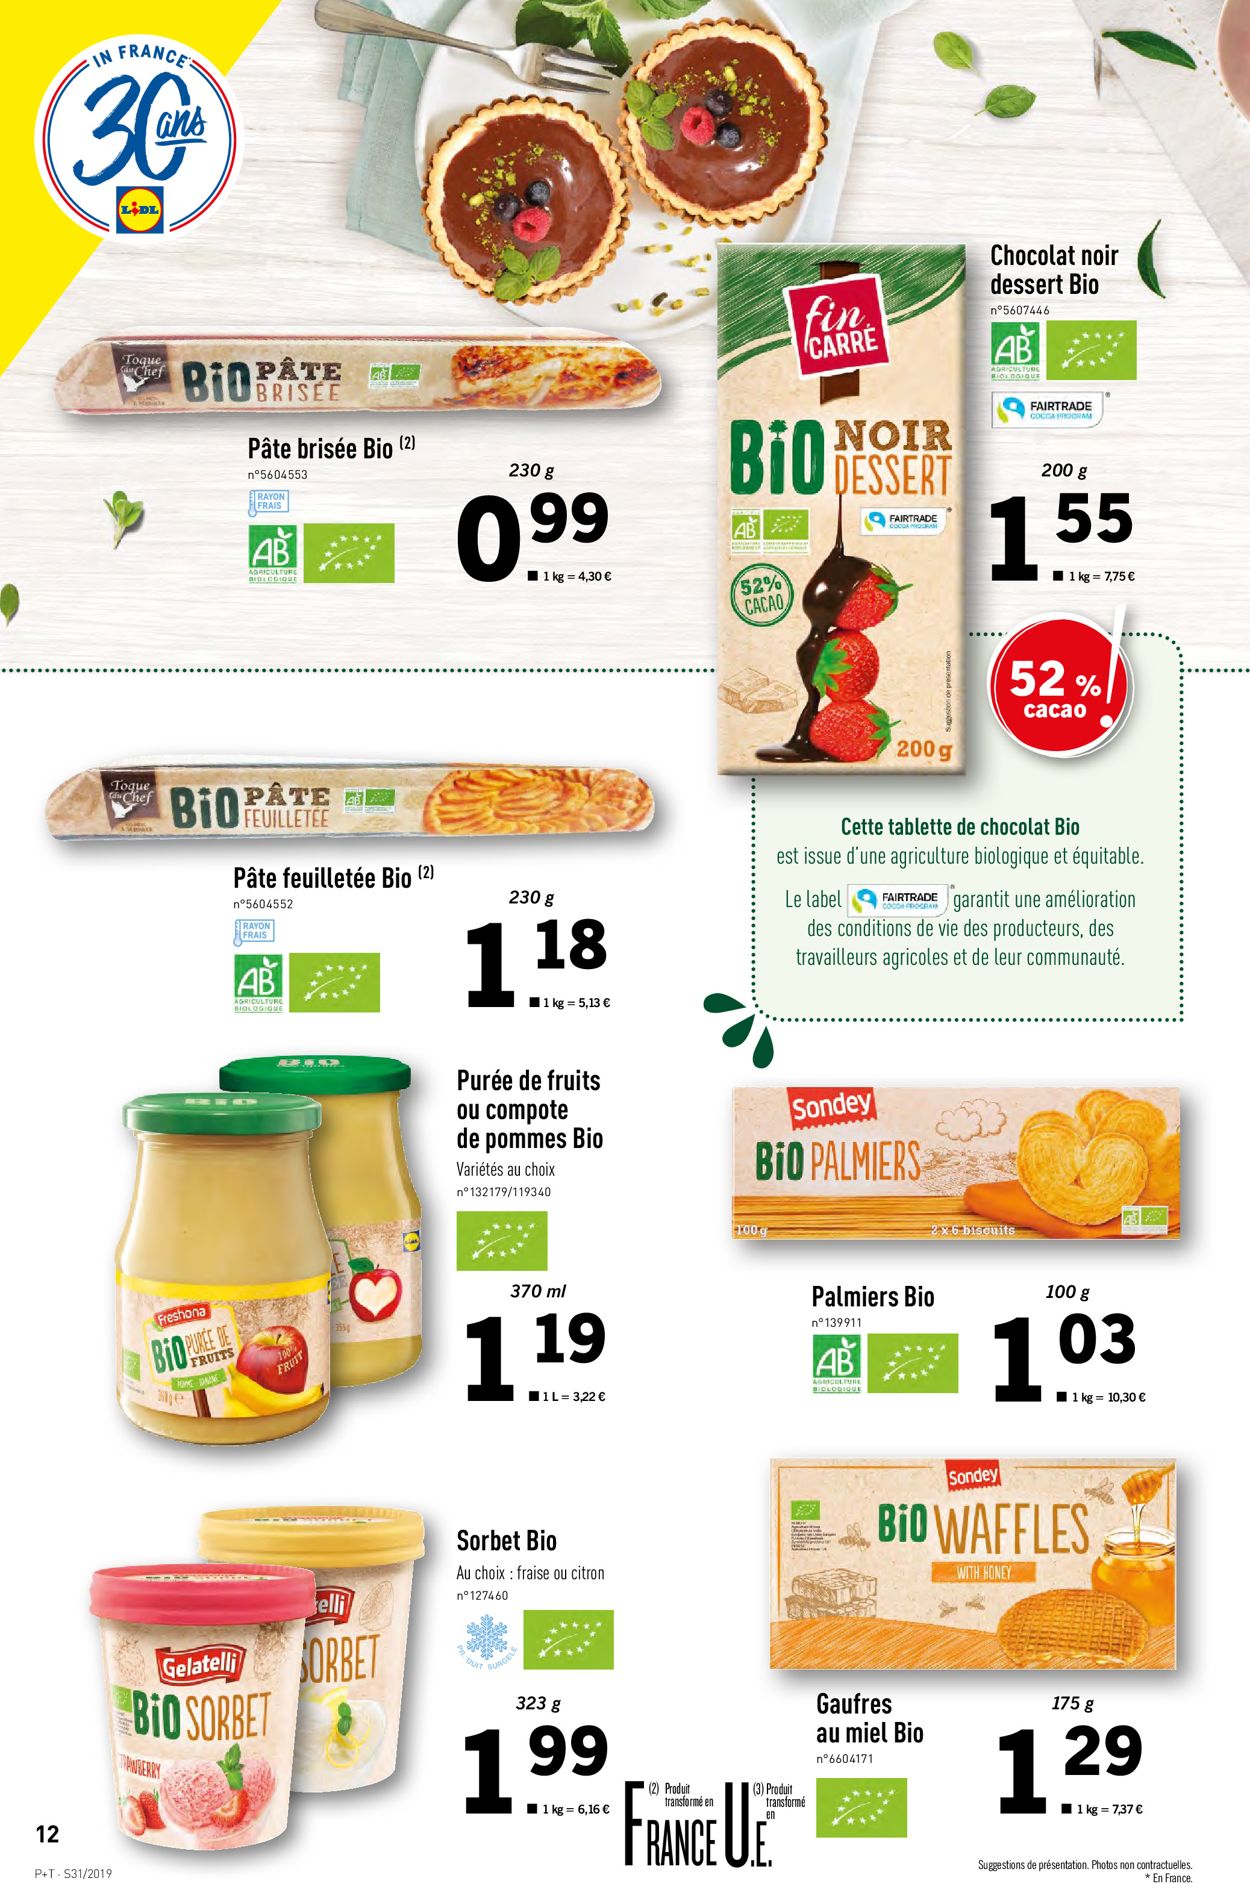 Lidl Catalogue - 31.07-06.08.2019 (Page 12)